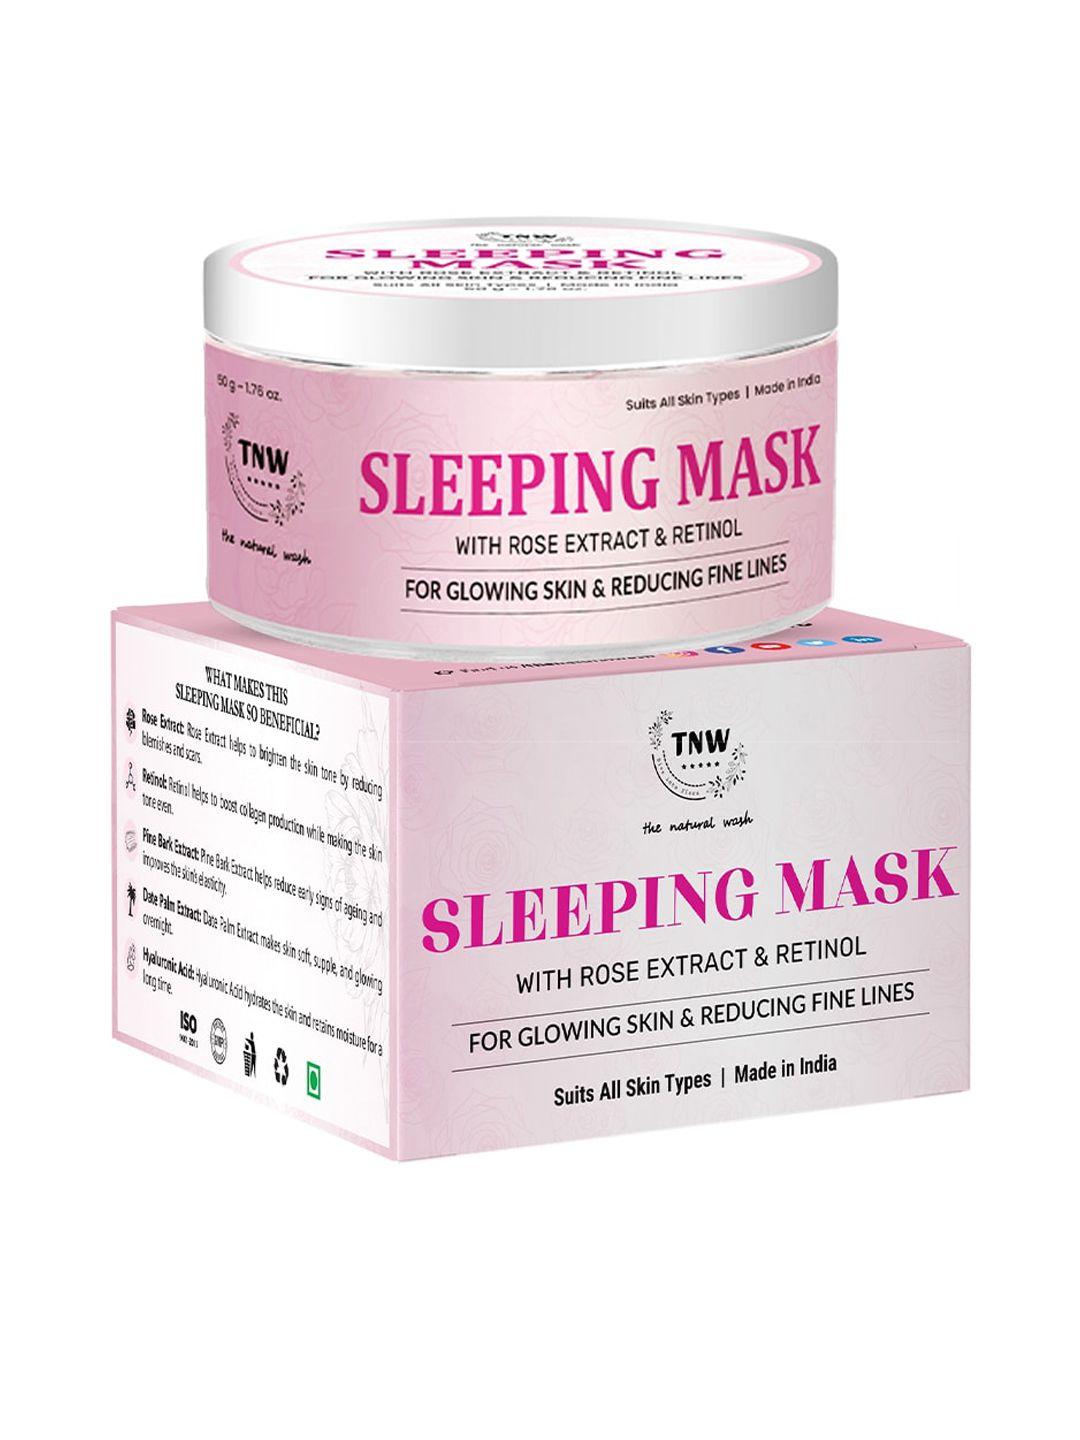 tnw the natural wash sleeping mask with rose extract & retinol for glowing skin - 50 g